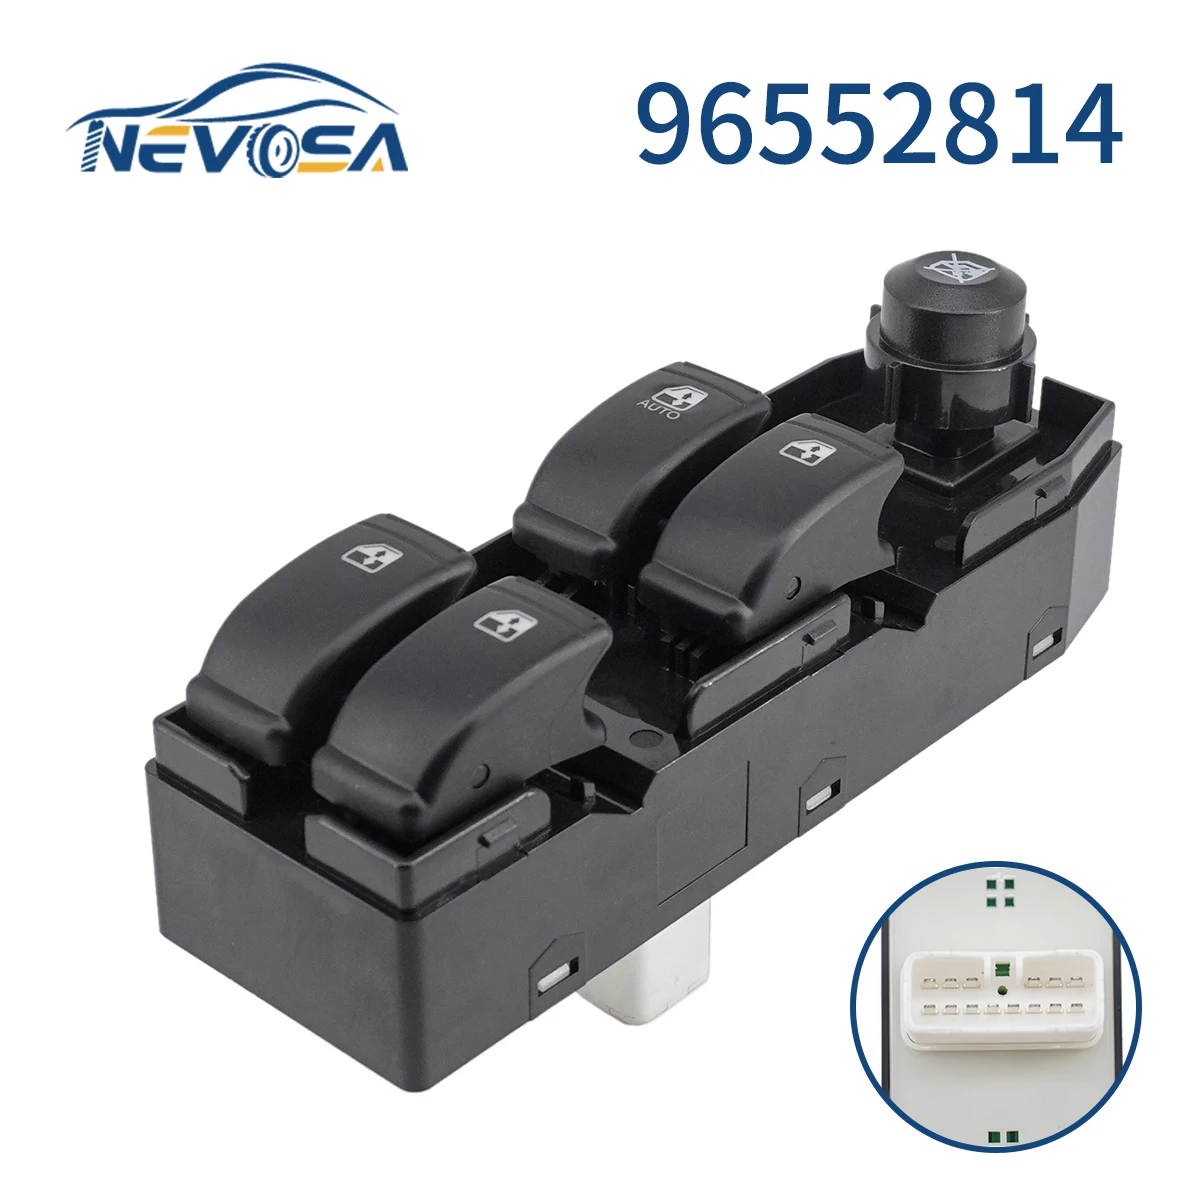 

NEVOSA For Chevrolet Optra Lacetti 96552814 Auto New High Quality Front Left Window Lifter Switch LHD Car Parts